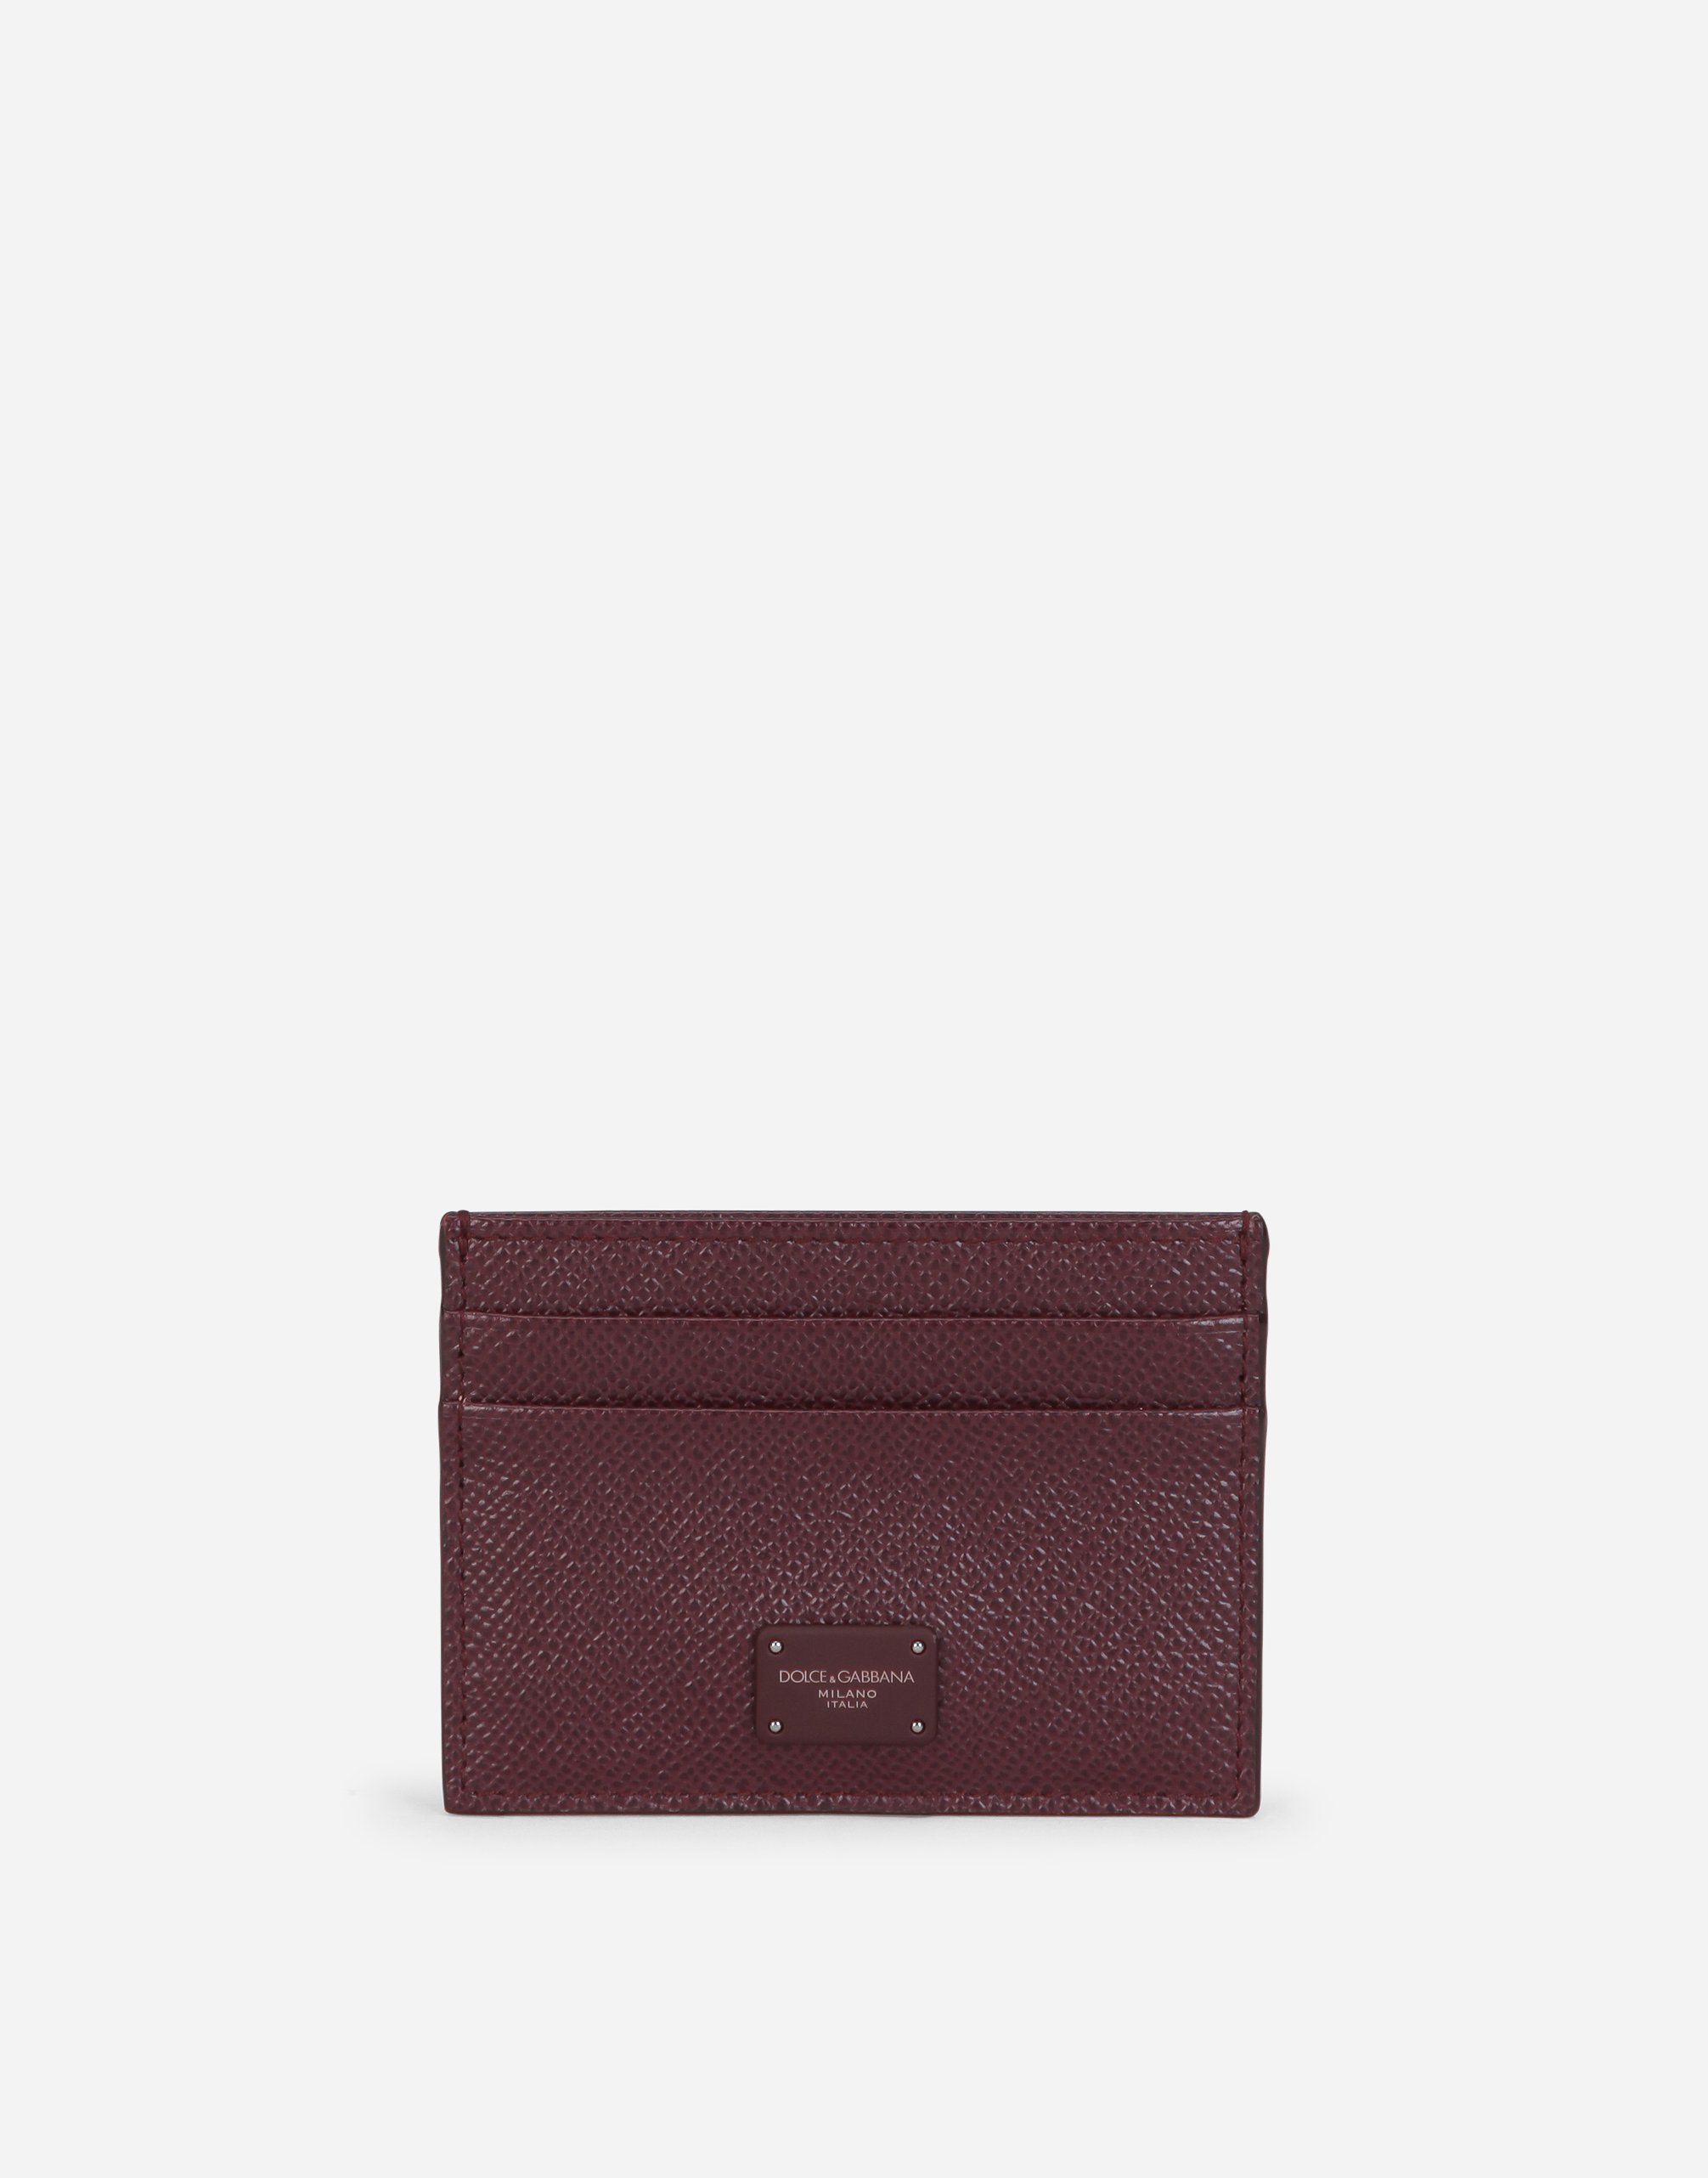 Dauphine calfskin card holder with branded tag in Bordeaux